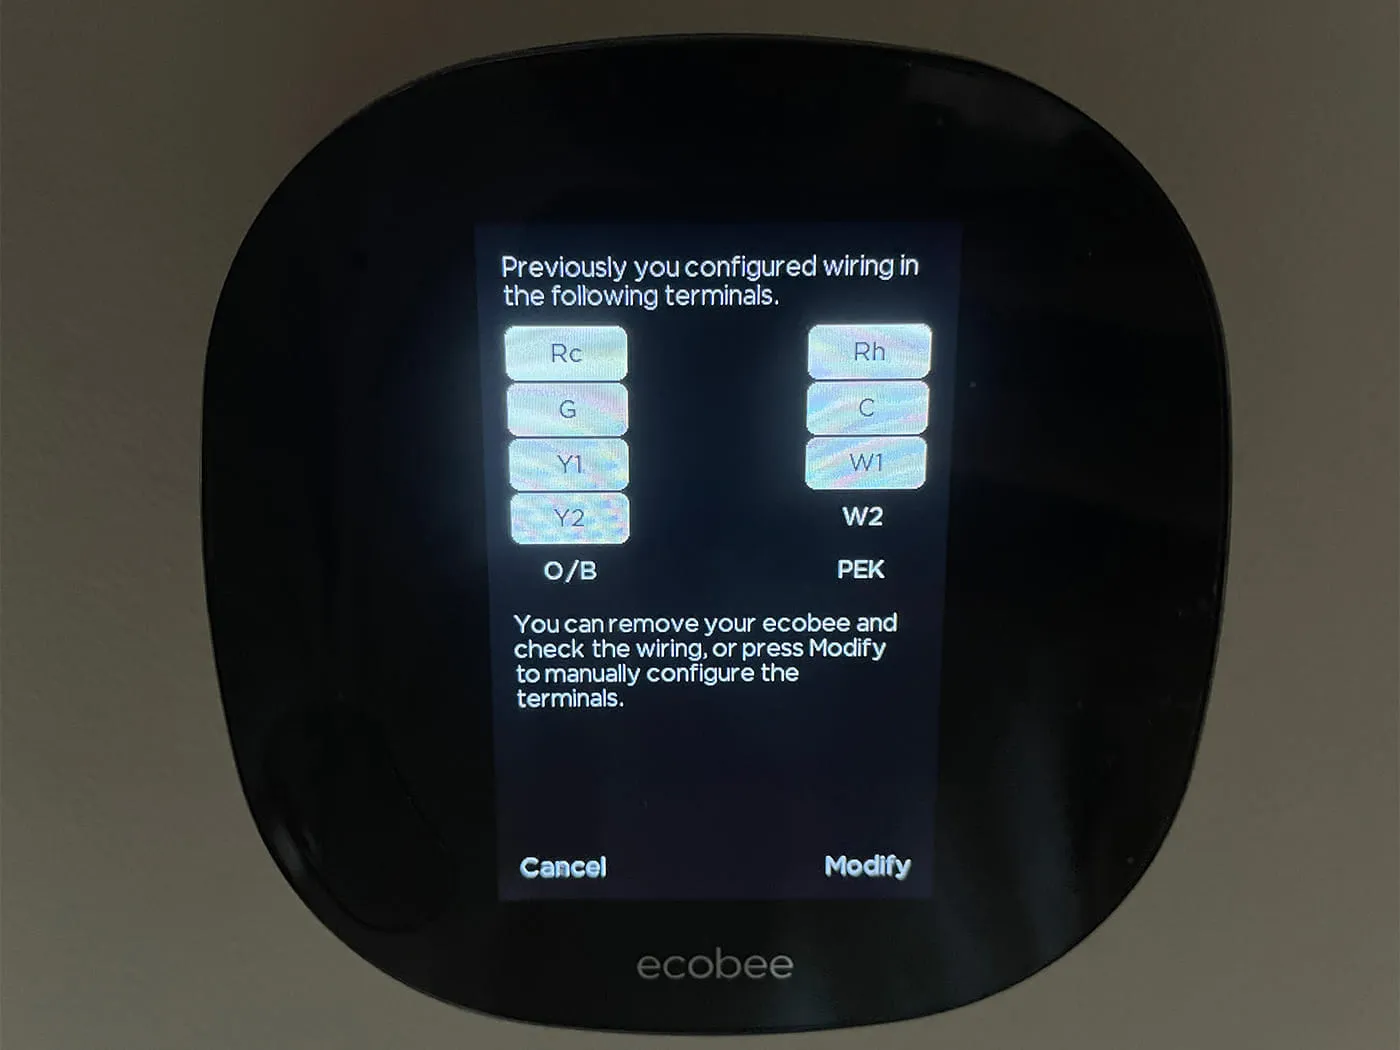 Ecobee thermostat Previously Configured Wiring Modify screen